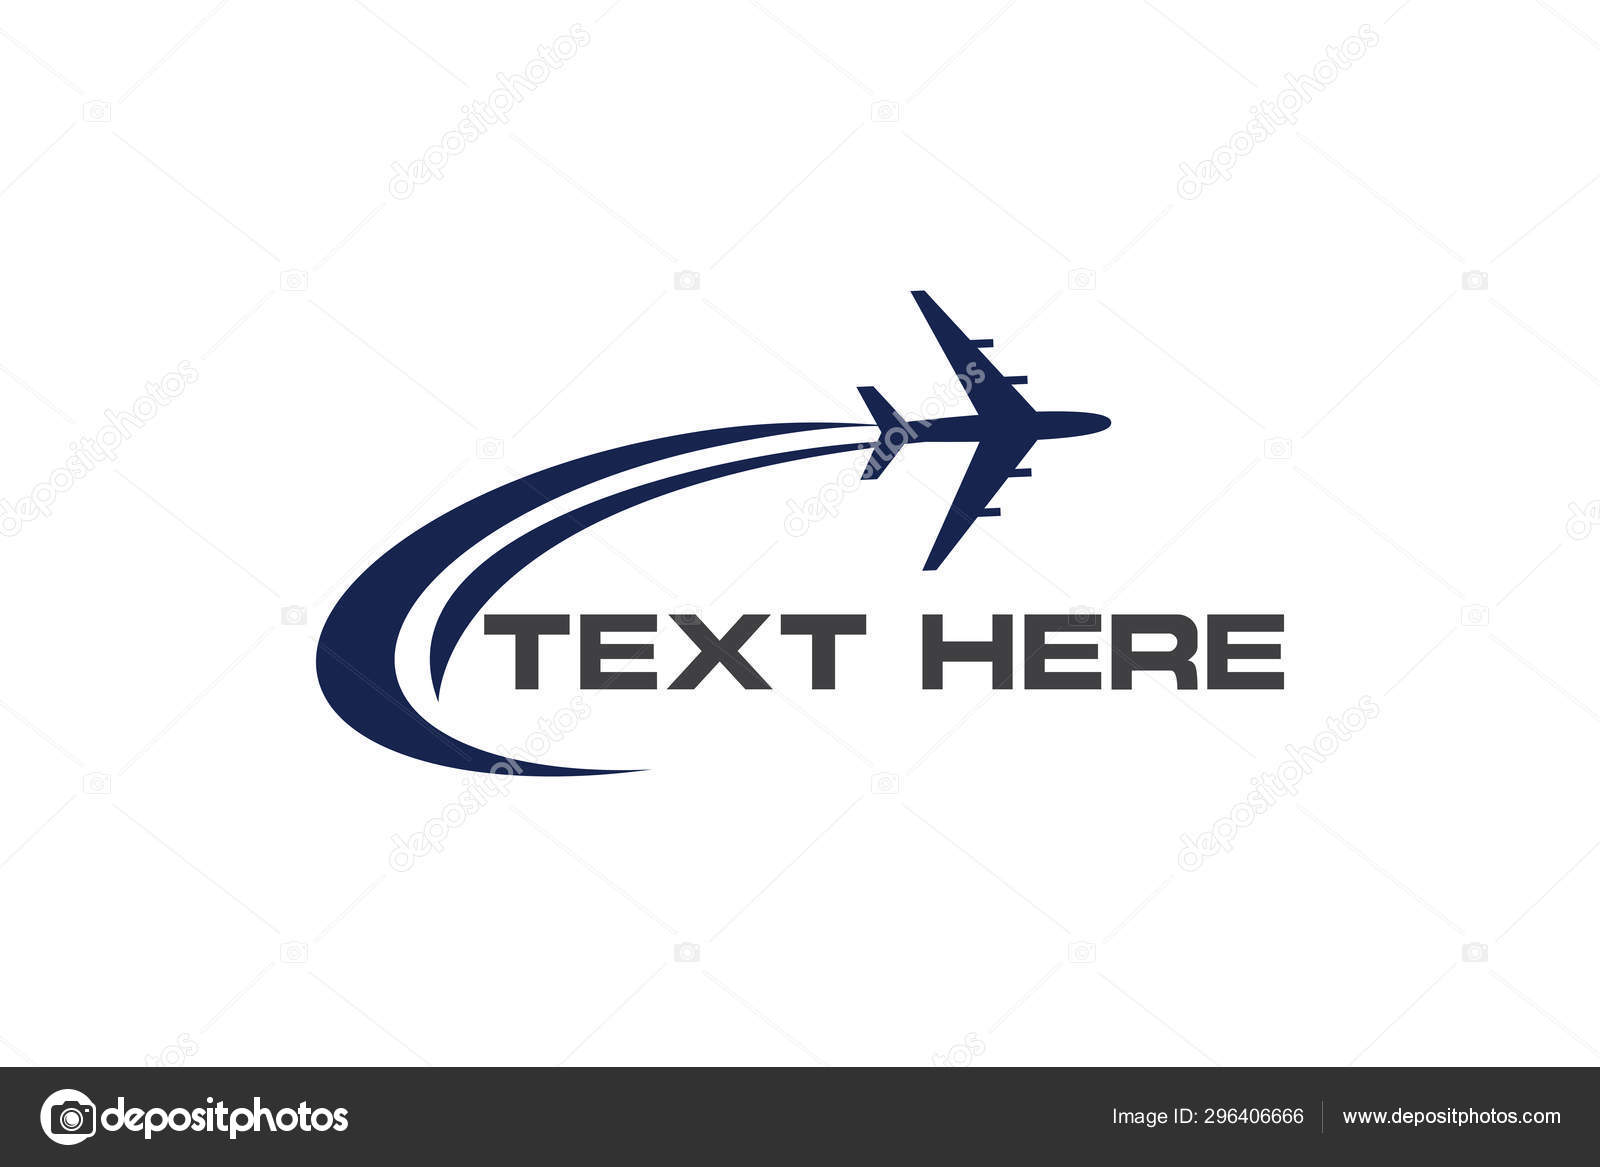 Free: Airplane company logo traveling logo vector image - nohat.cc